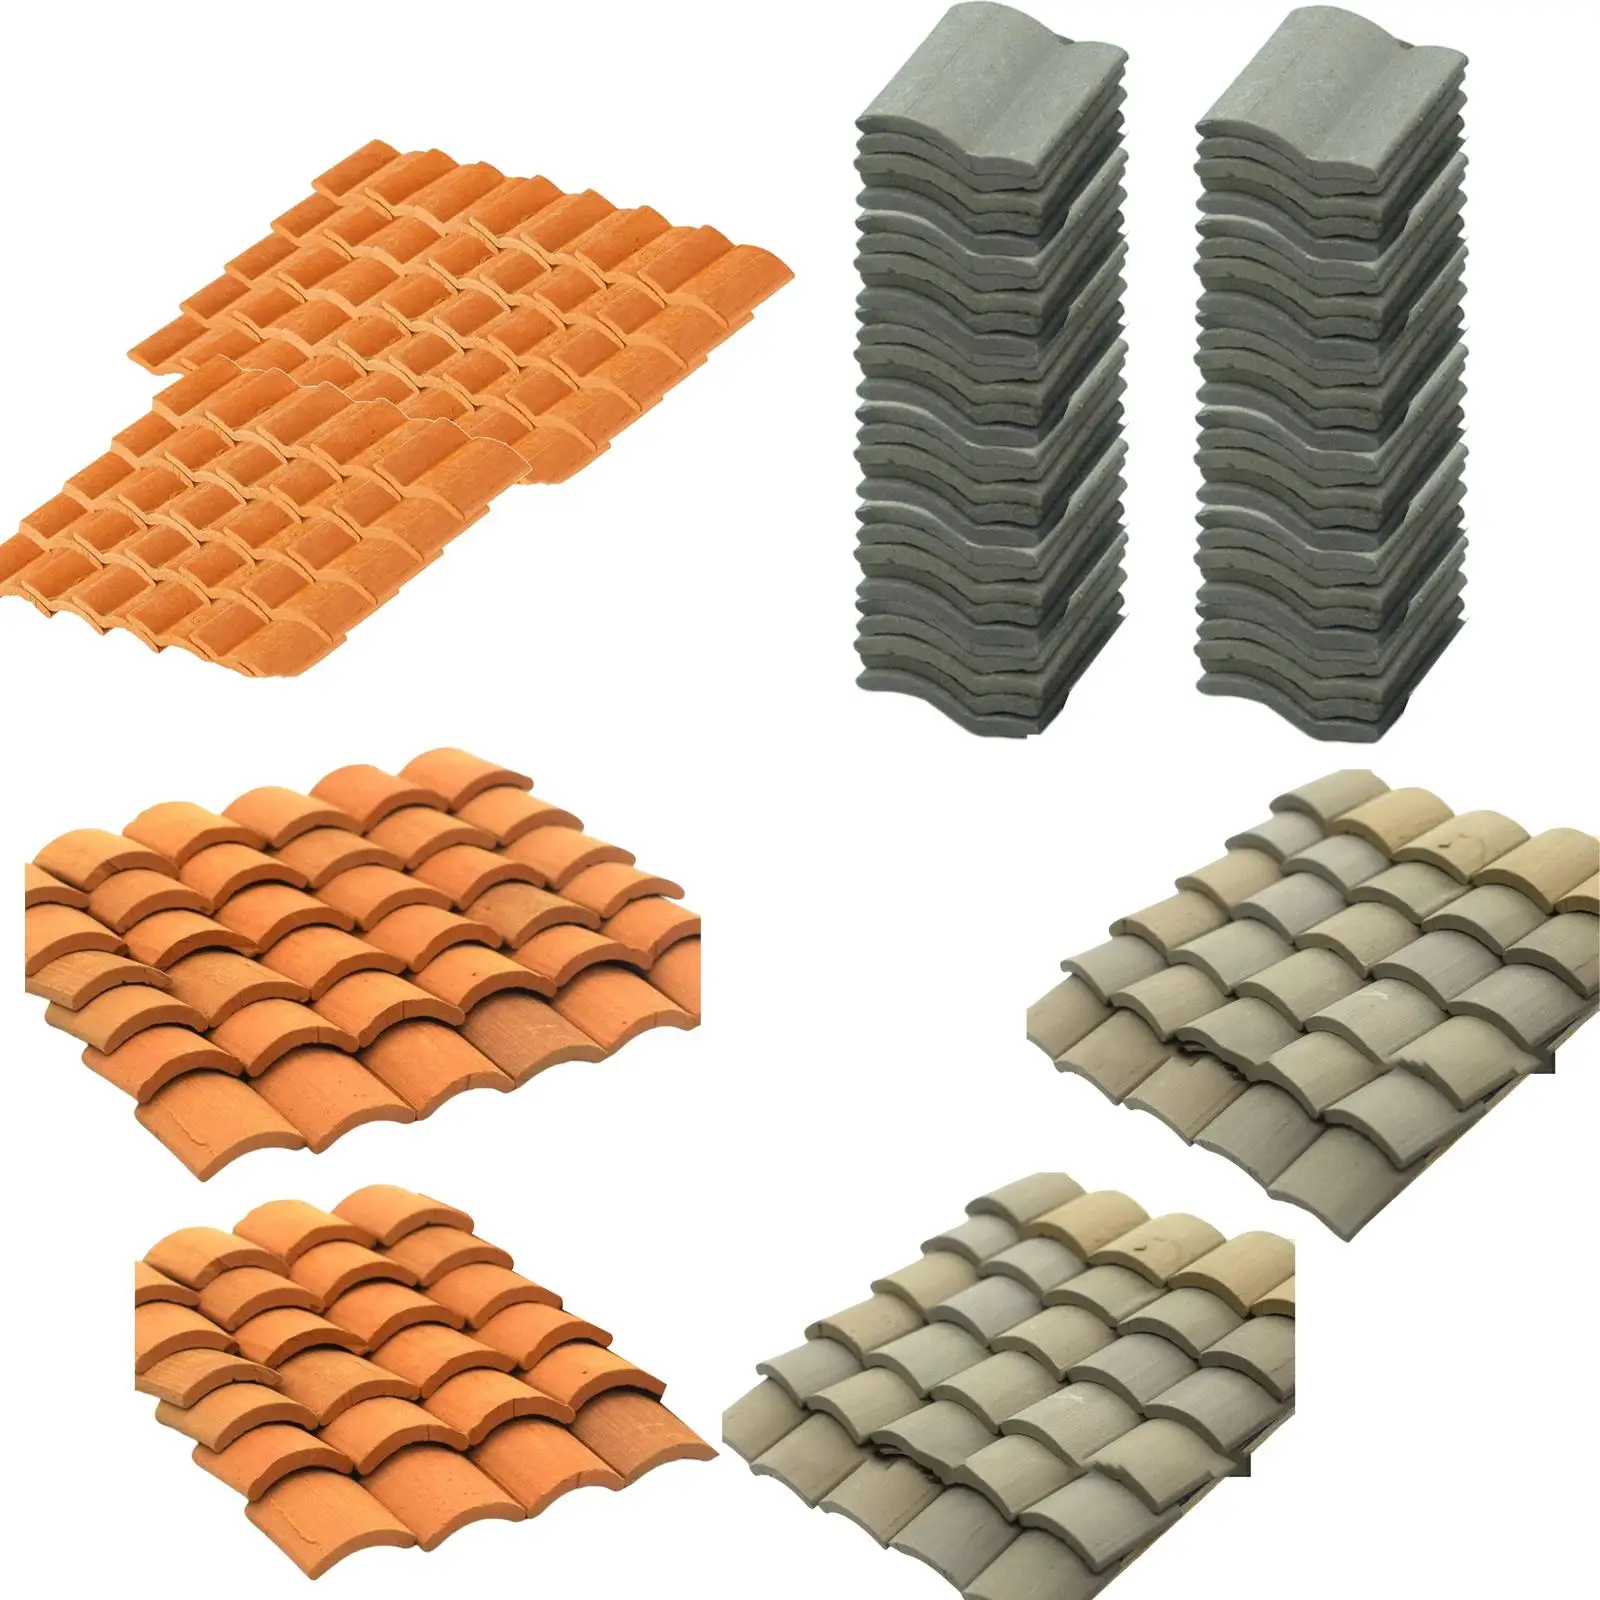 Set of 60 red Wall Bricks 1:1 Miniature Tiles Figurine Landscaping Accessories for Dollhouses Toys DIY Accessory